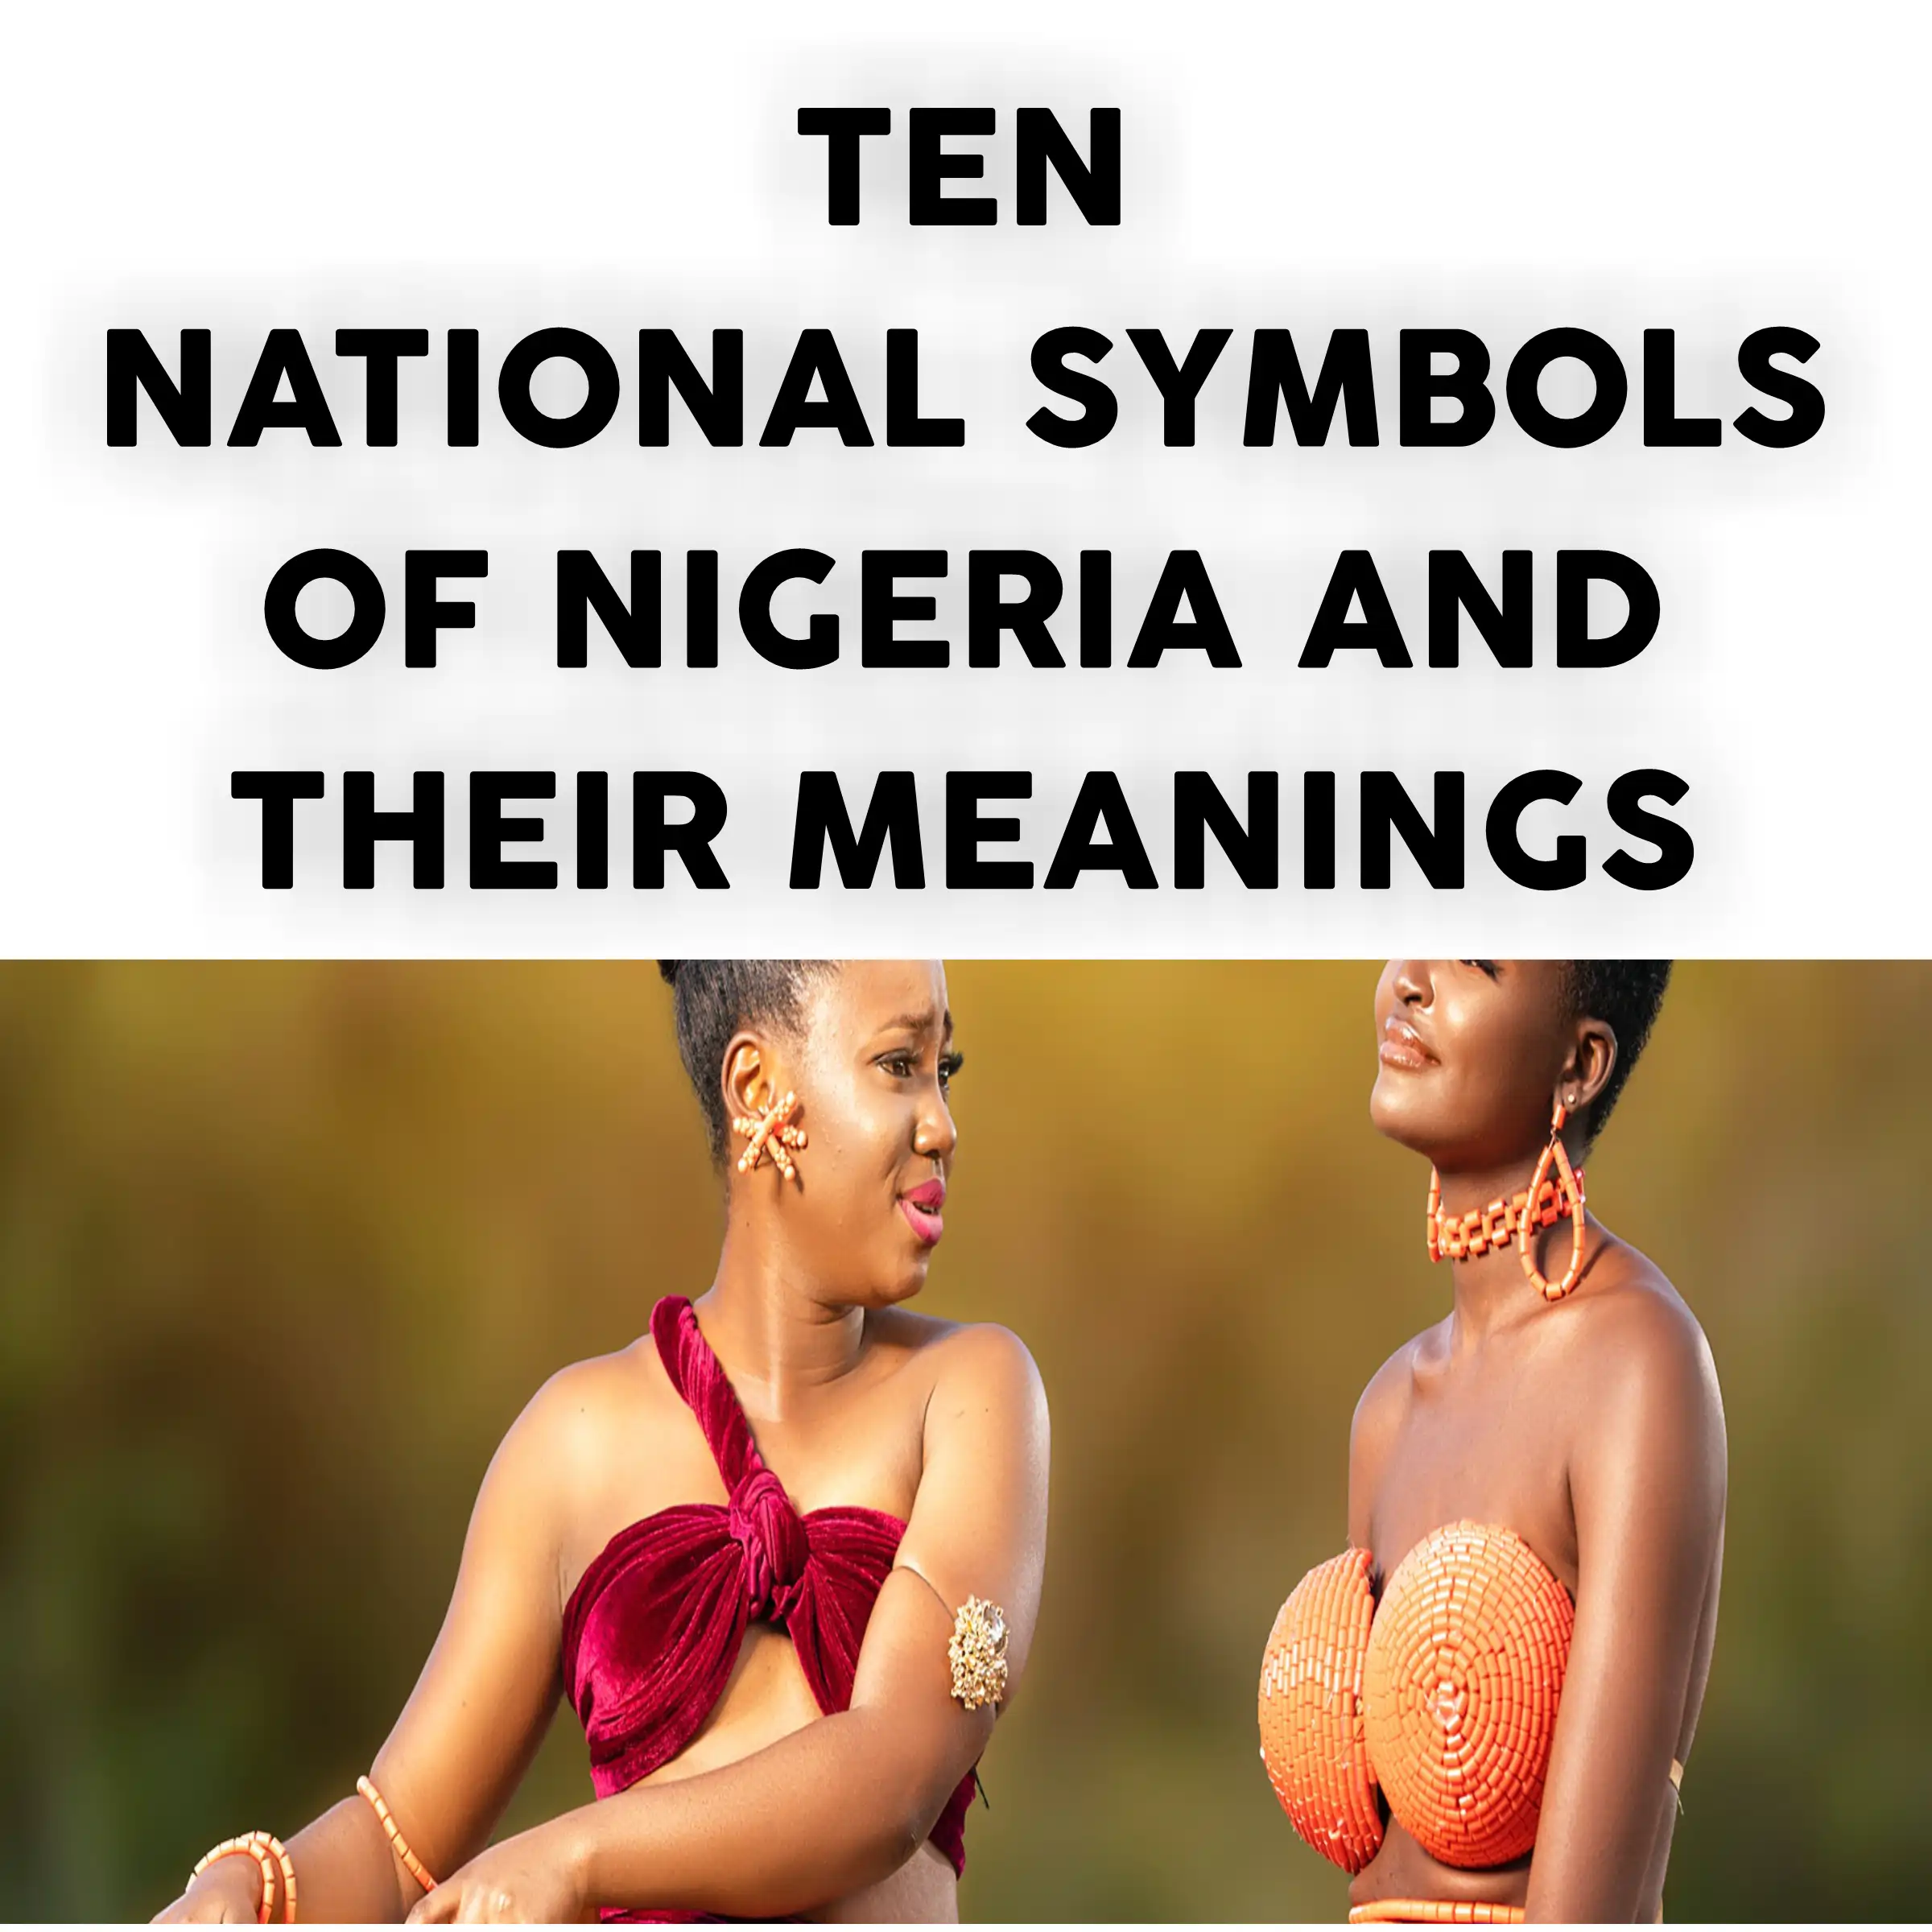 two woman in traditional outfit as symbol image for 10 national symbols of Nigeria and their meanings